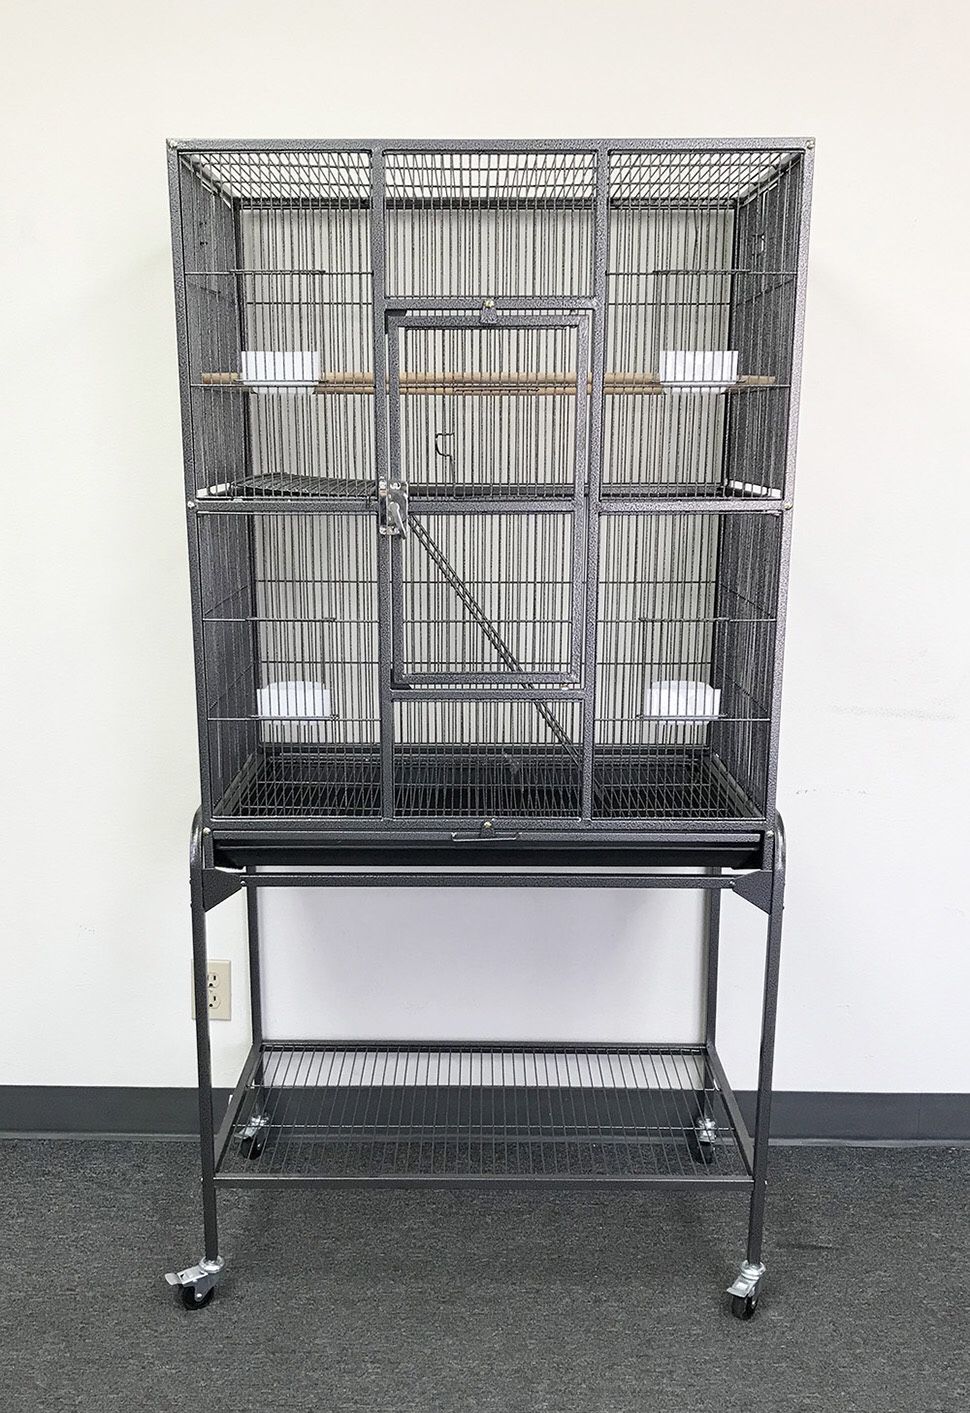 New $90 Large Bird Cage Parrot Ferret Cockatiel House Gym Perch Stand w/ Wheels 32”x18”x63”